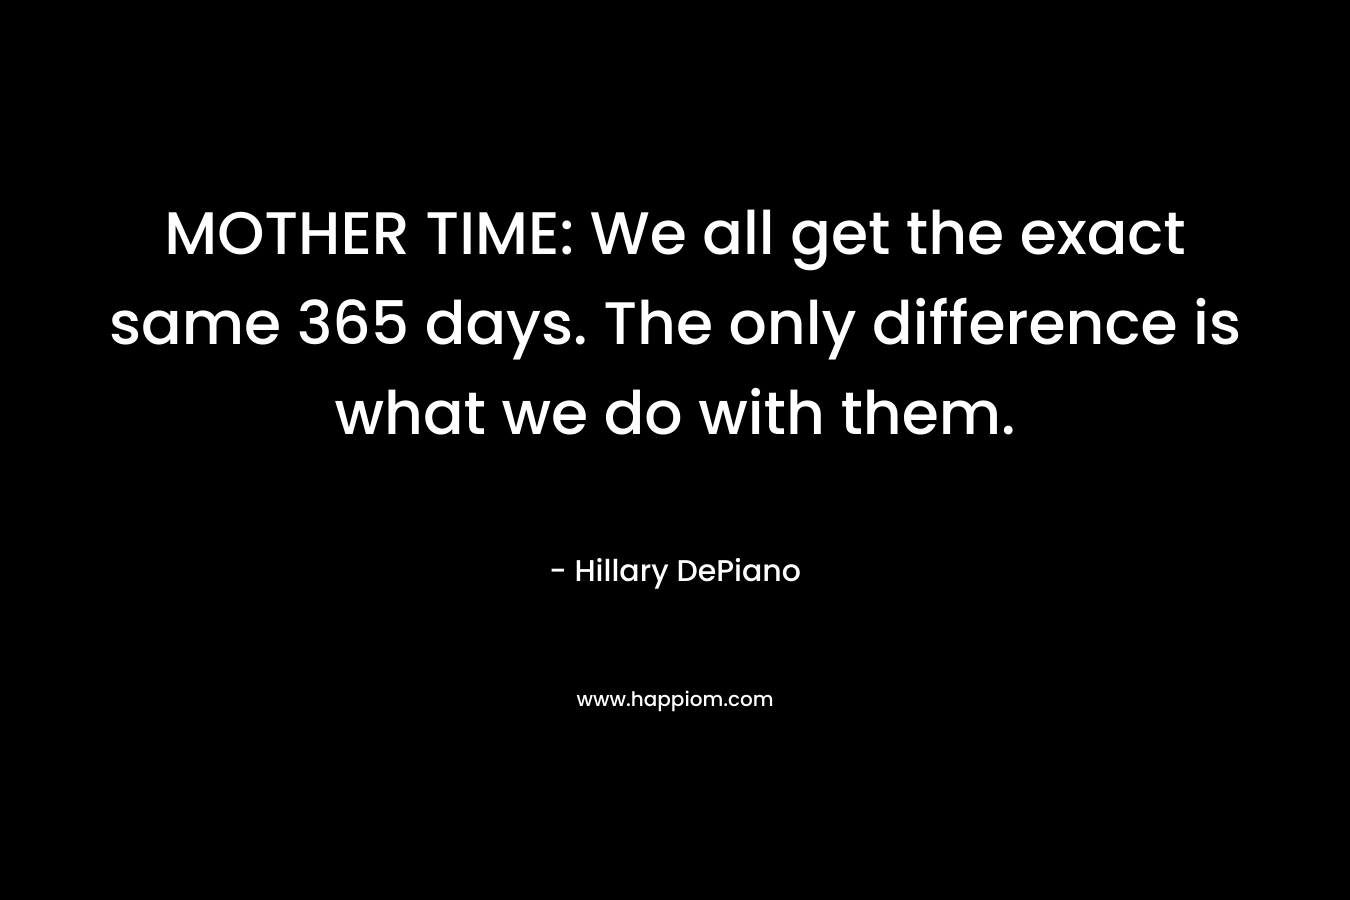 MOTHER TIME: We all get the exact same 365 days. The only difference is what we do with them. – Hillary DePiano